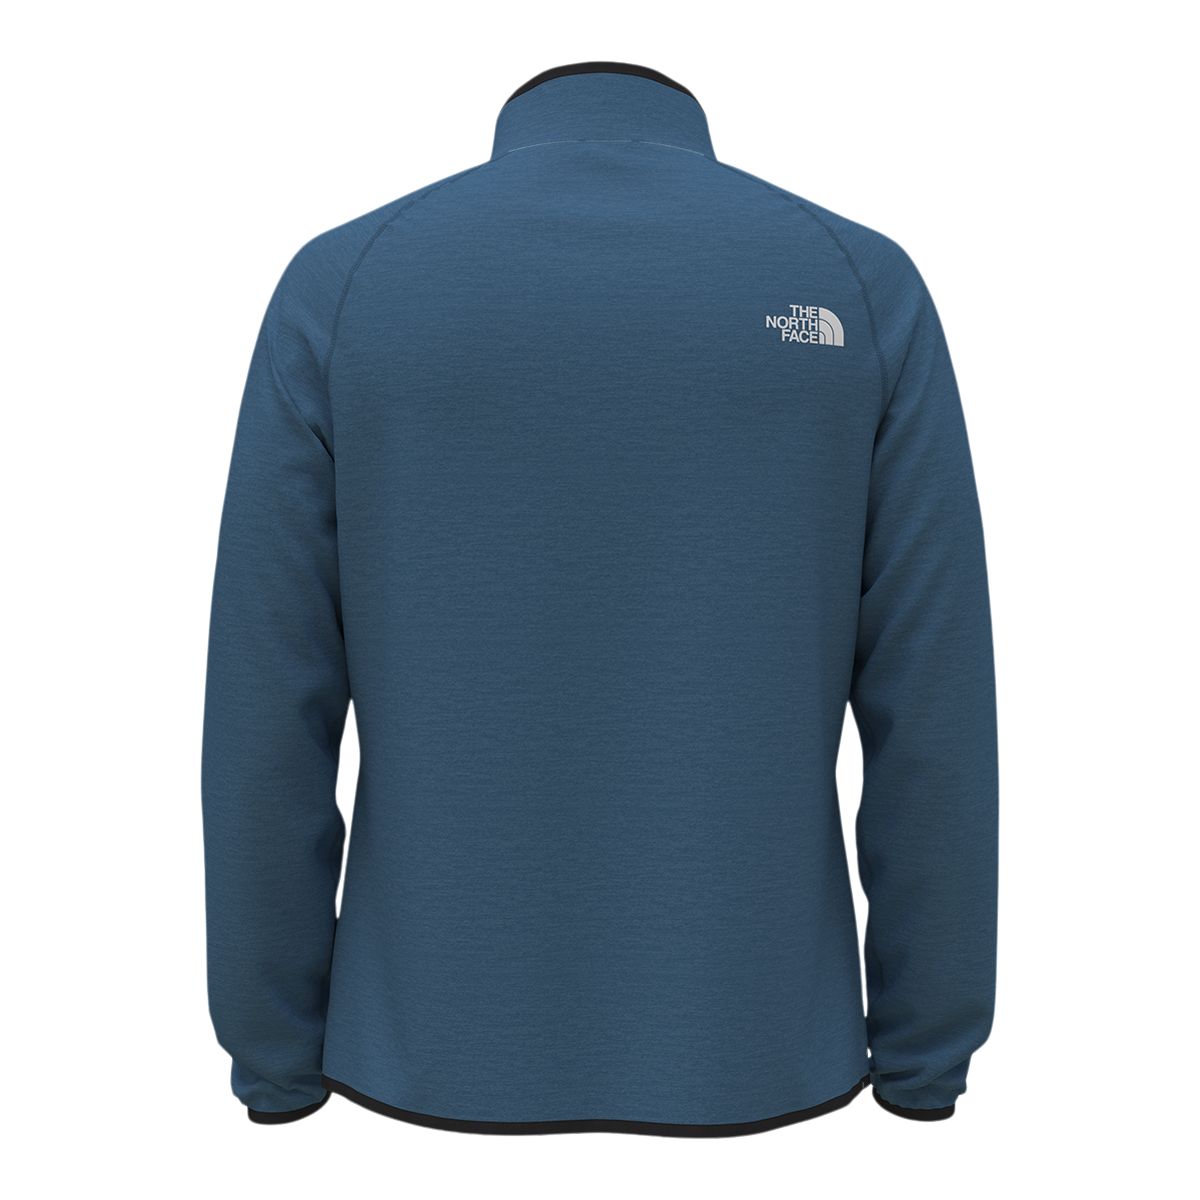 The North Face Men's Canyonlands Full Zip Long Sleeve Top